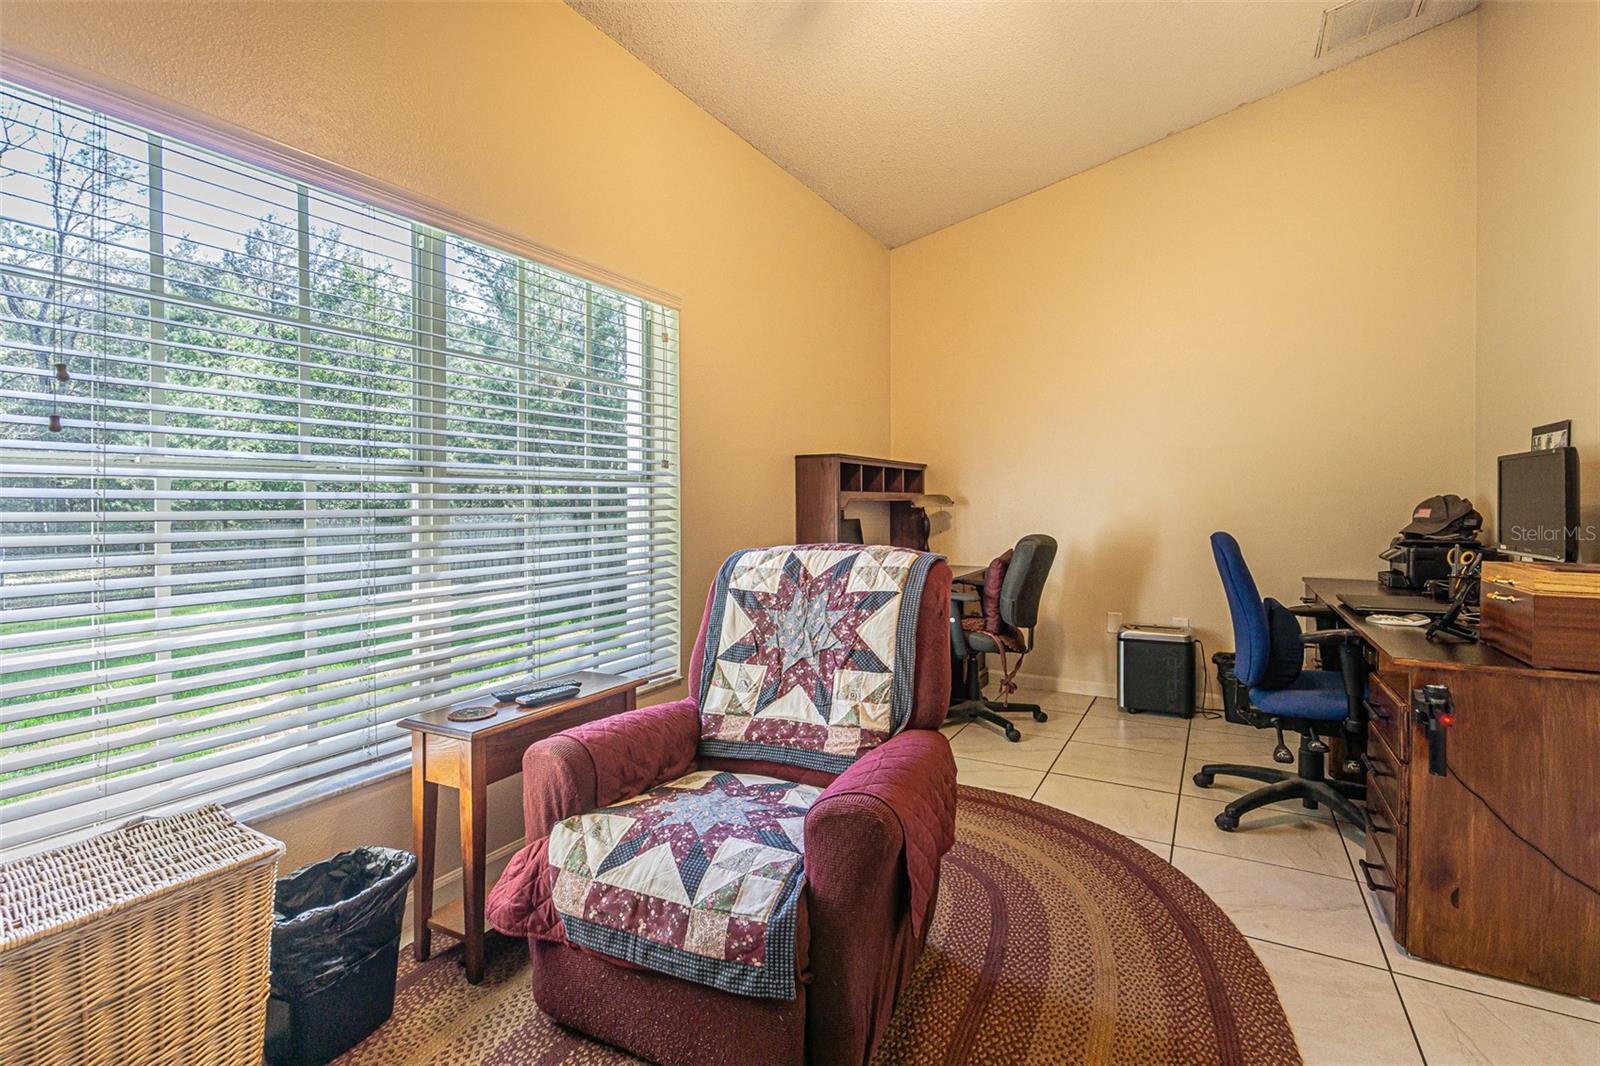 Den/office with gorgeous wooded view of the front yard, specifically the separately fenced area.